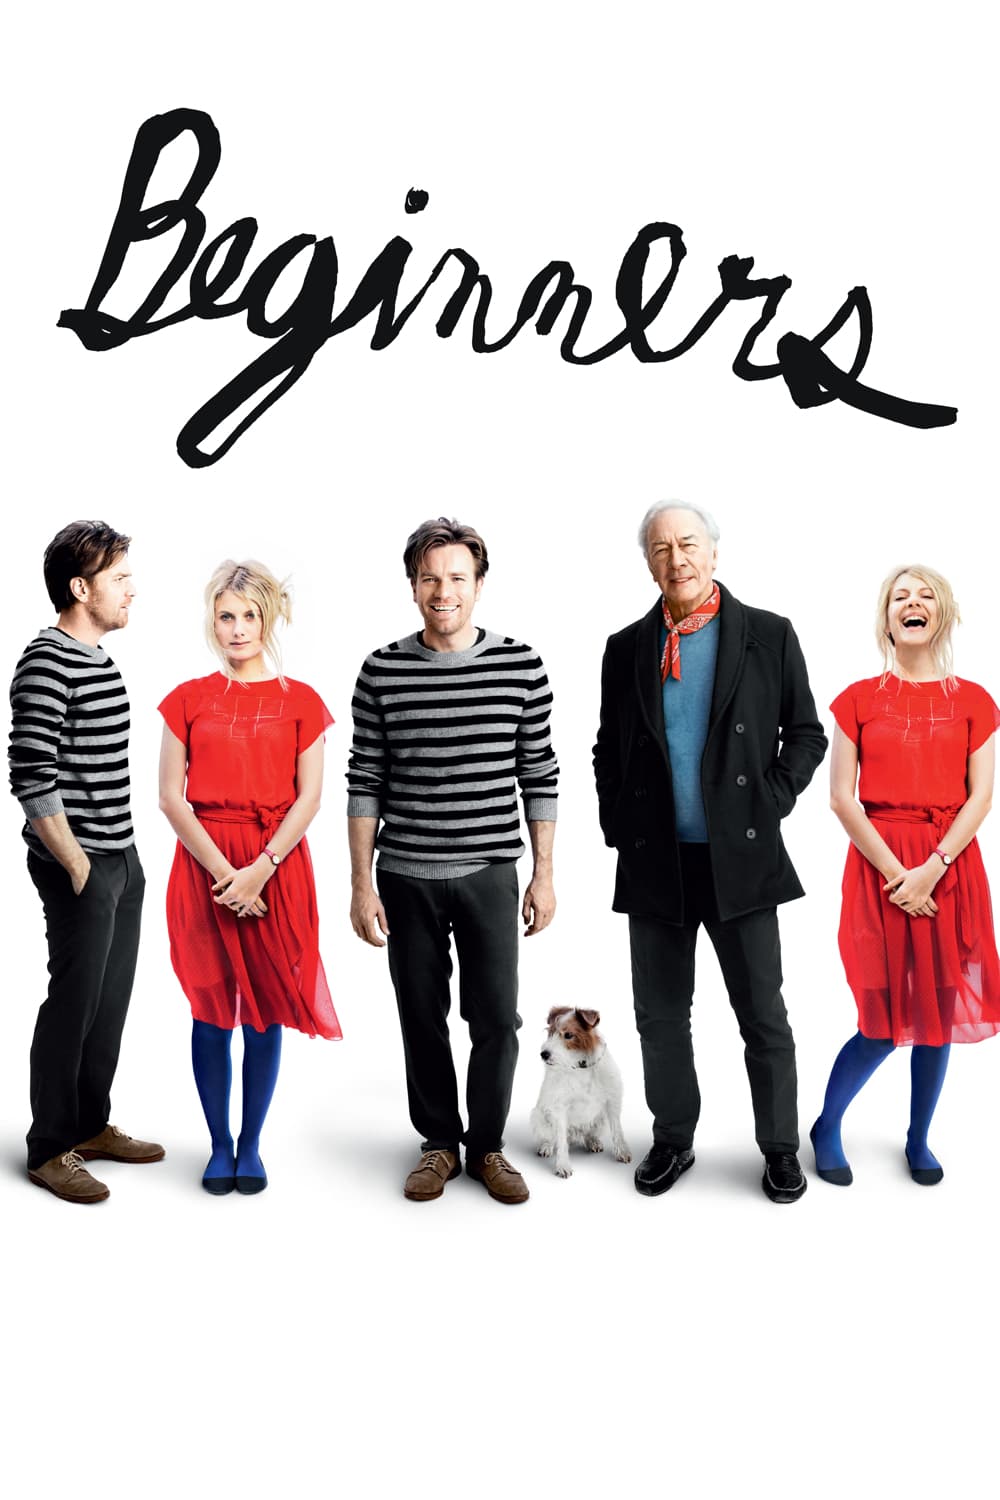 Poster for the movie "Beginners"